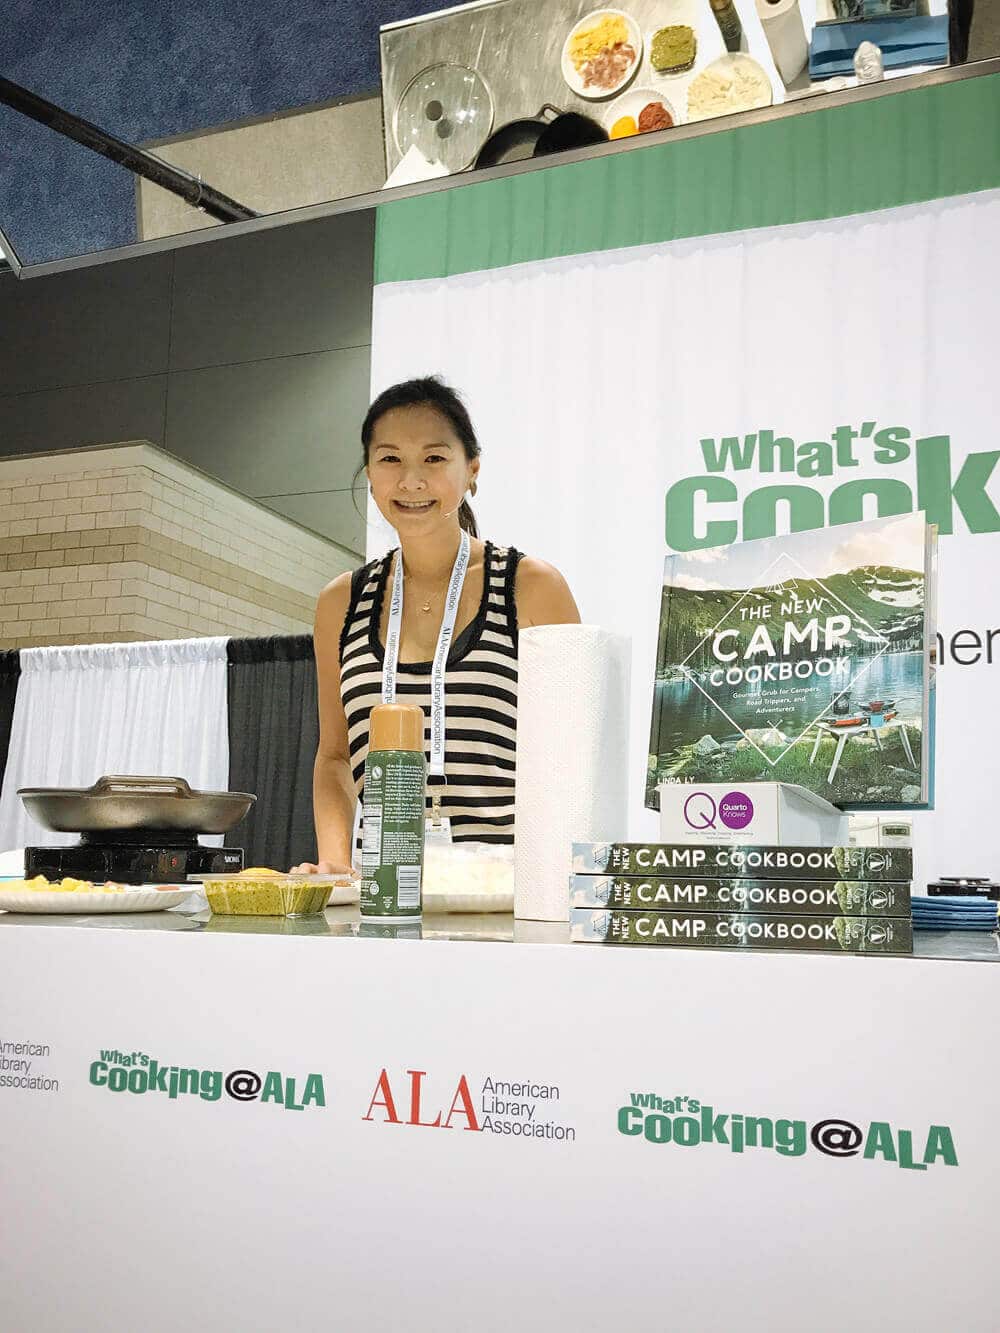 The New Camp Cookbook Is One of Amazon's "Best Cookbooks of the Month"